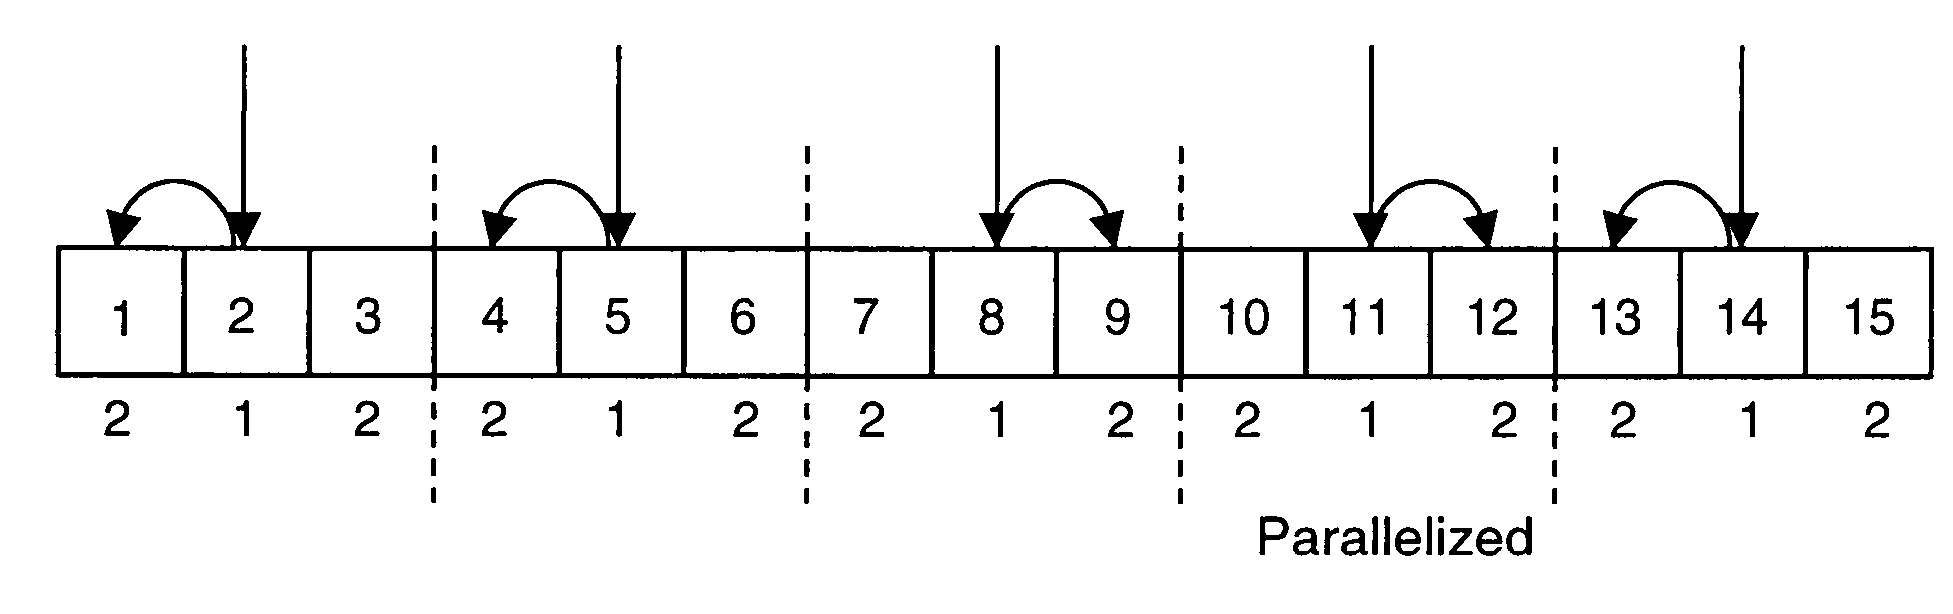 Parallel asymmetric binary search on lengths